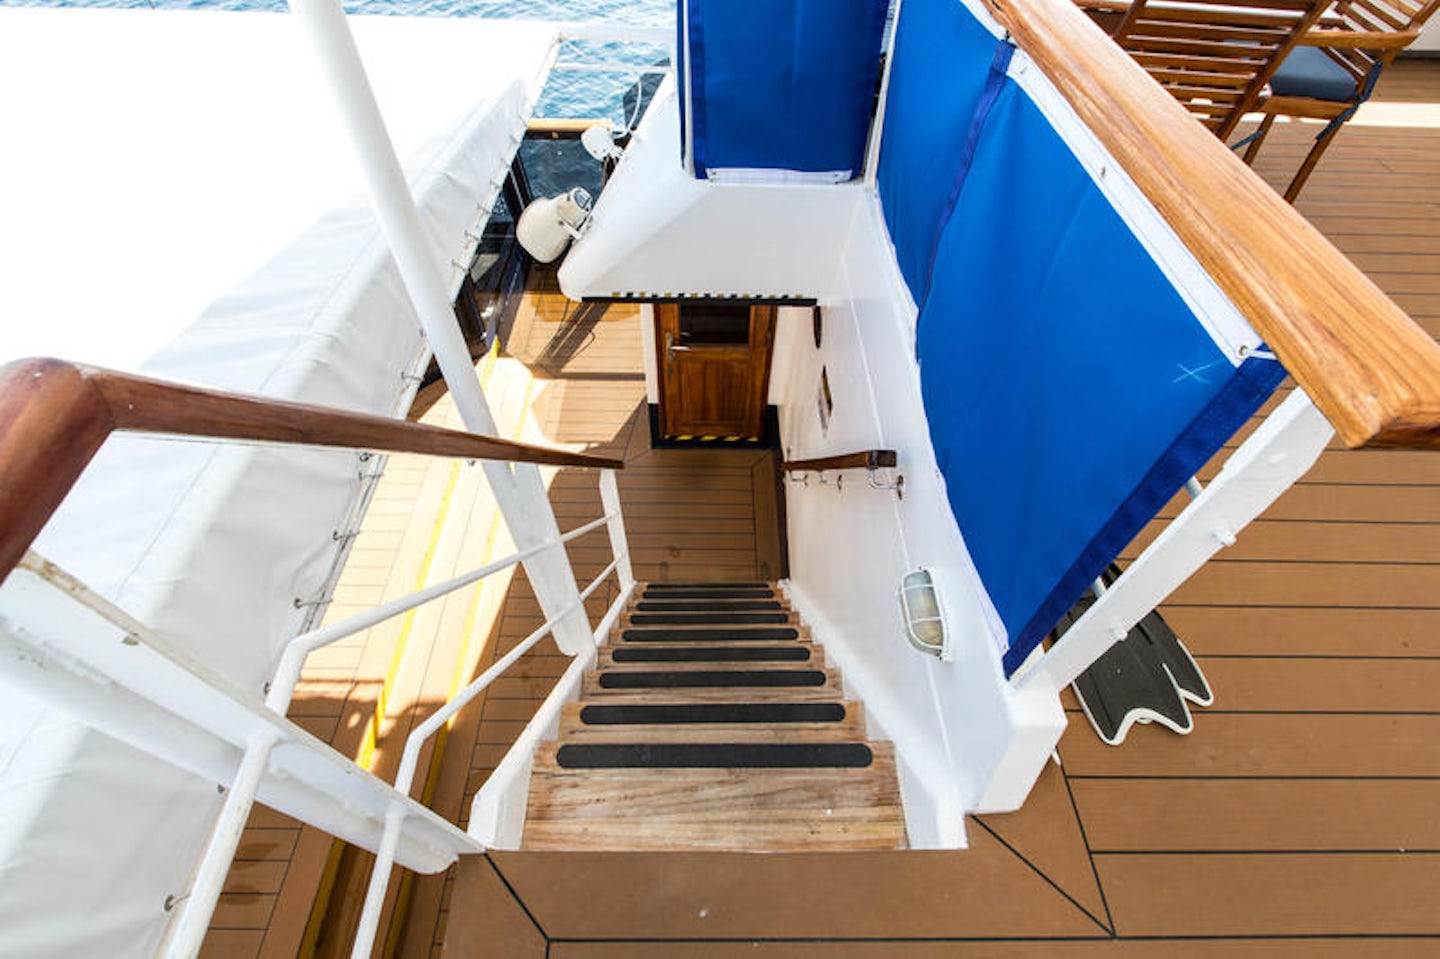 Stairs on National Geographic Islander